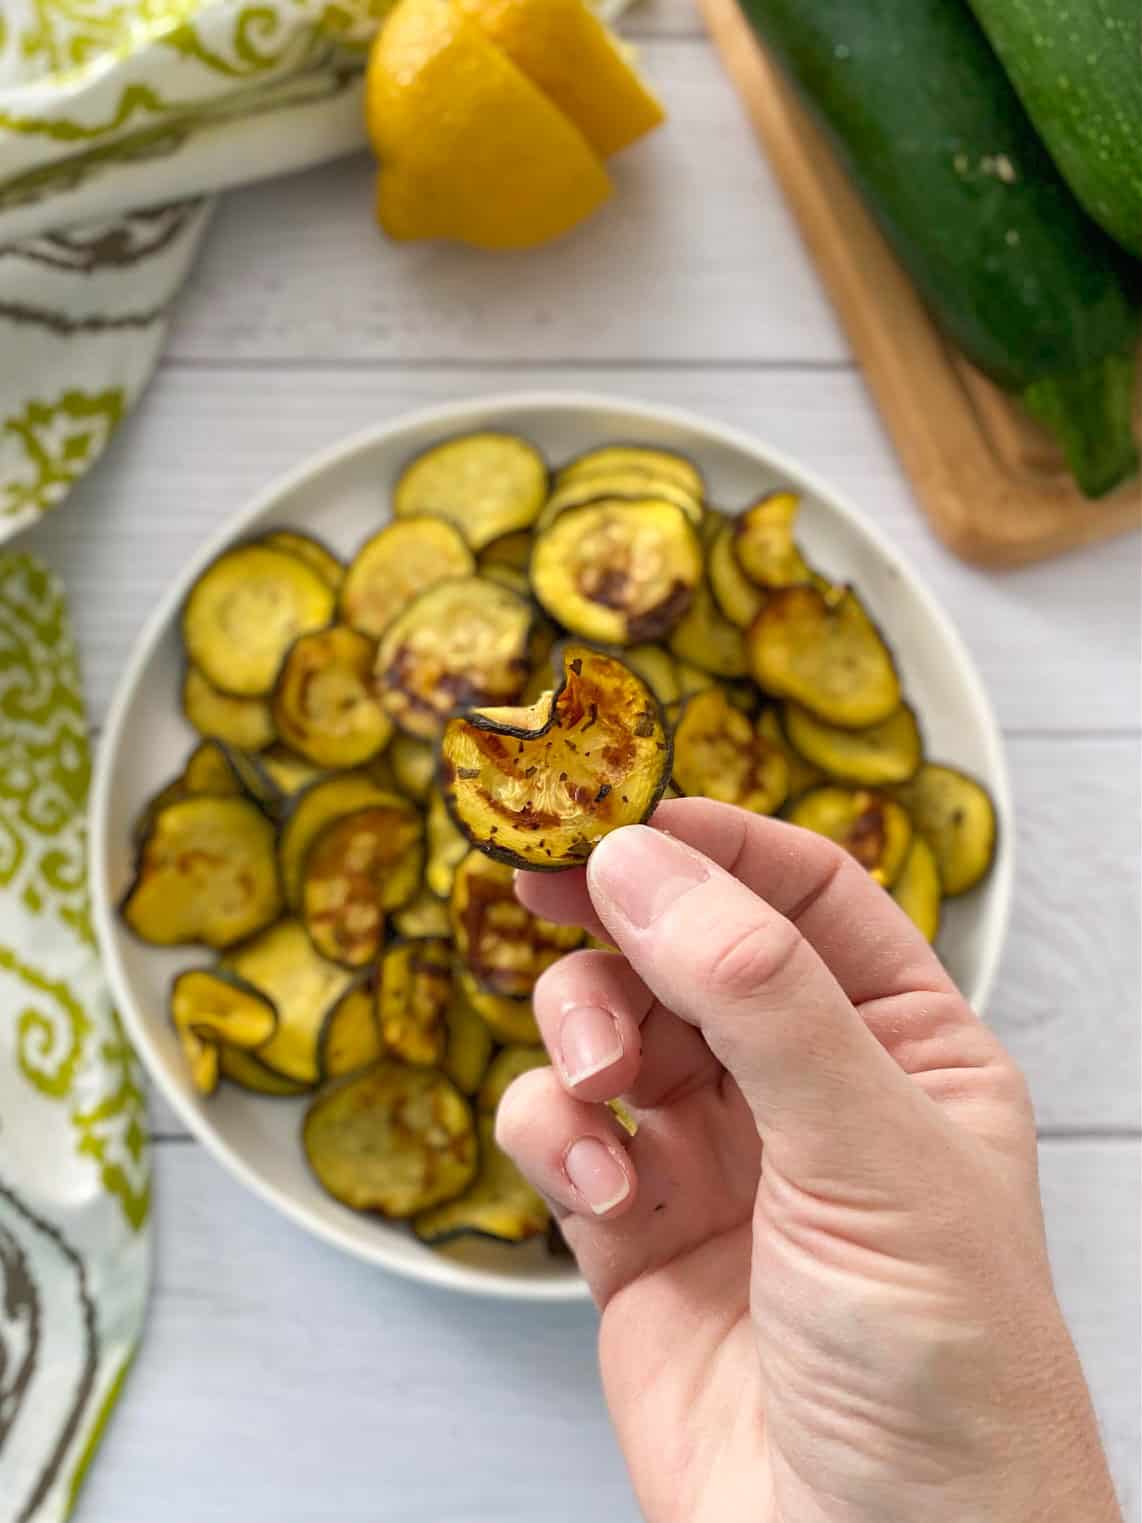 Hand holding up one slice of zucchini with plate of zucchini chips below.